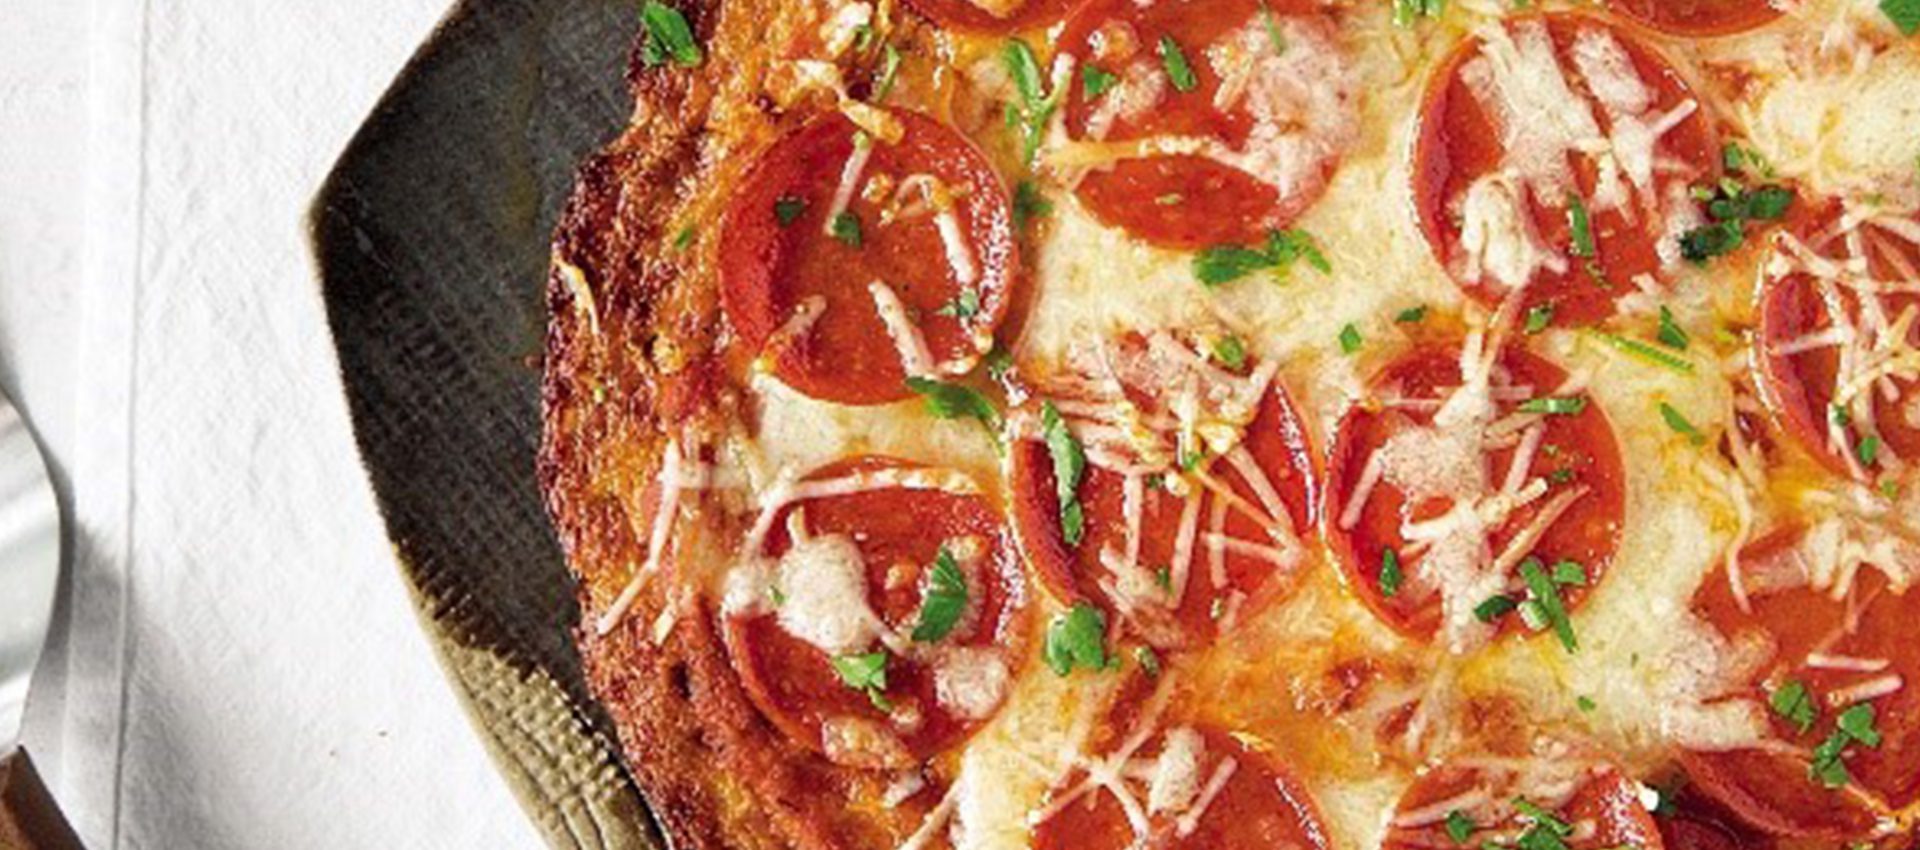 Pepperoni Pizza with Cauliflower Crust - Colorado Country Life Magazine